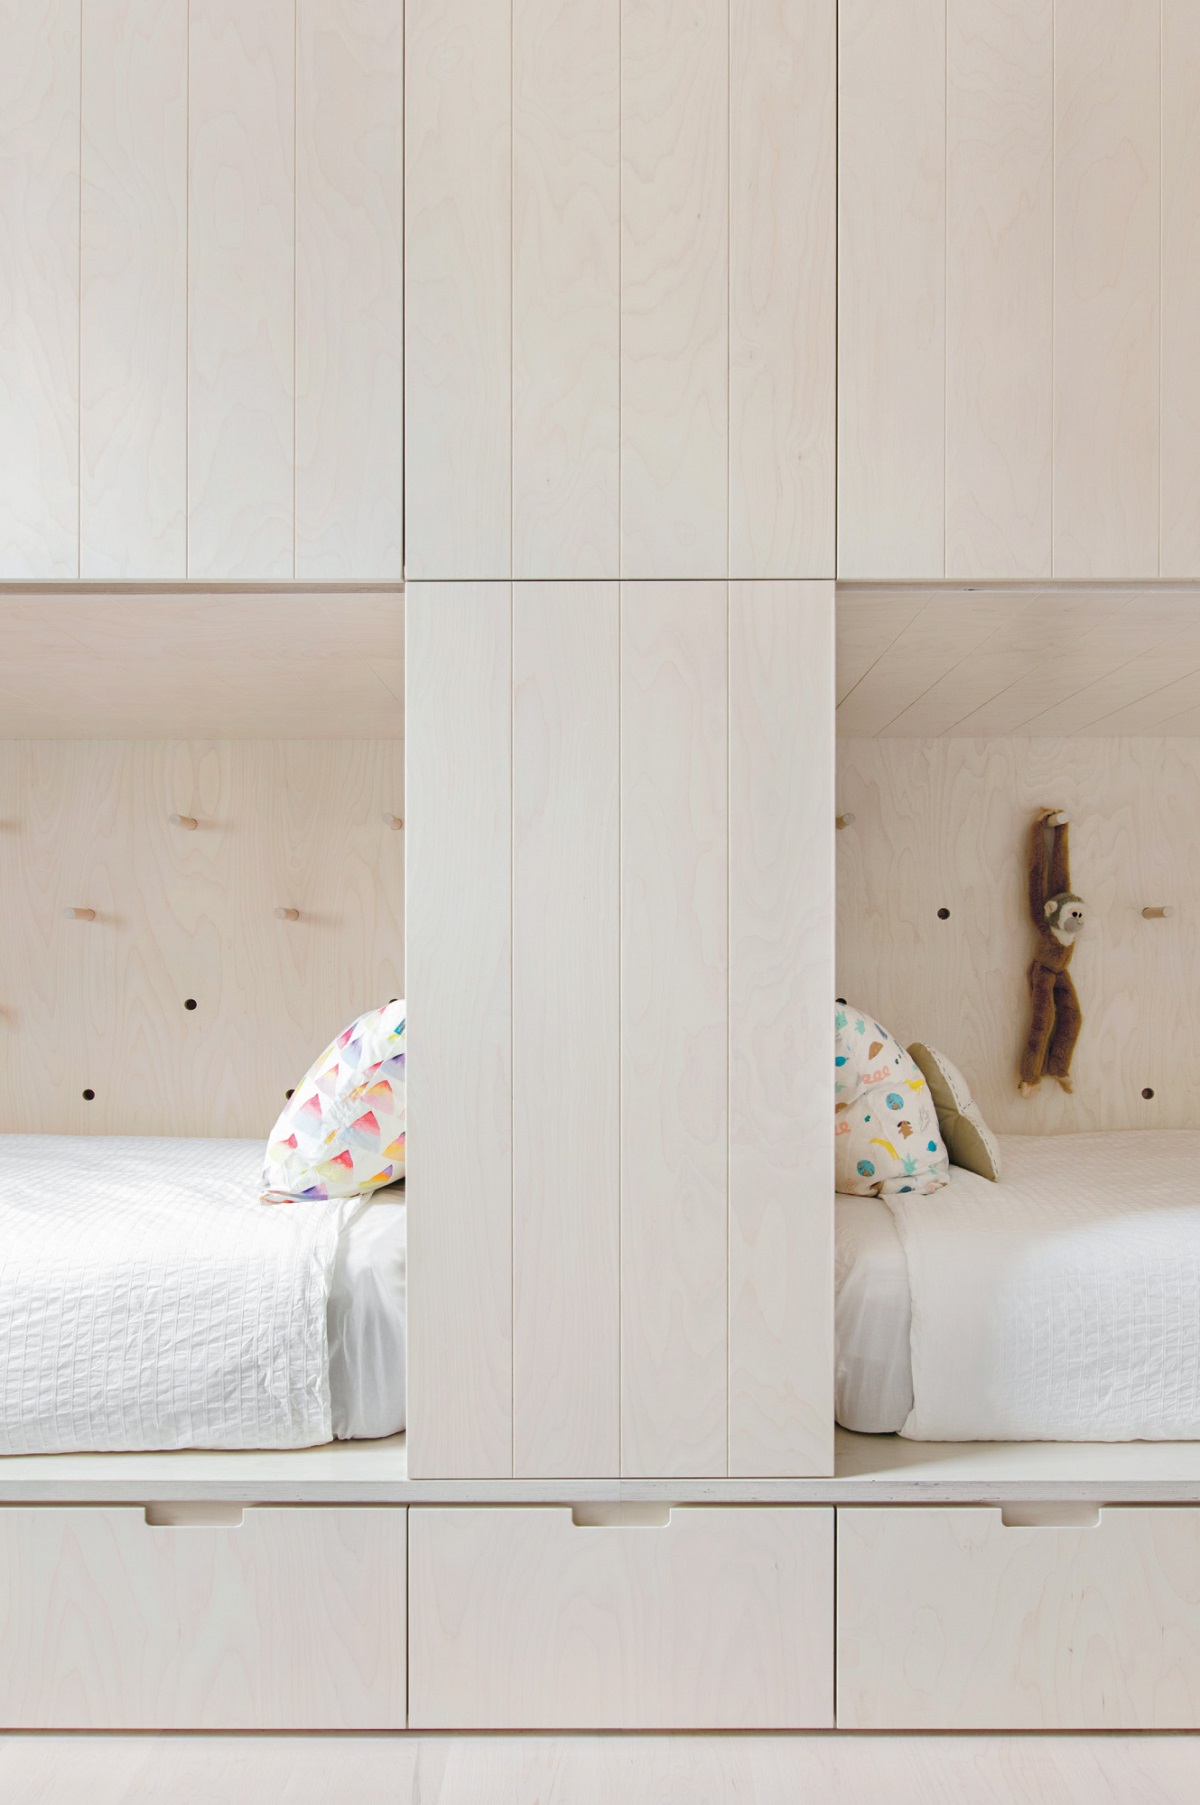 In this Scandinavian-inspired home, beds are encased in custom joinery, creating a bunk-bed effect. "It relieves the amount of loose furniture required leading the space to feel less cluttered and more spacious," says architect Clare Cousins.